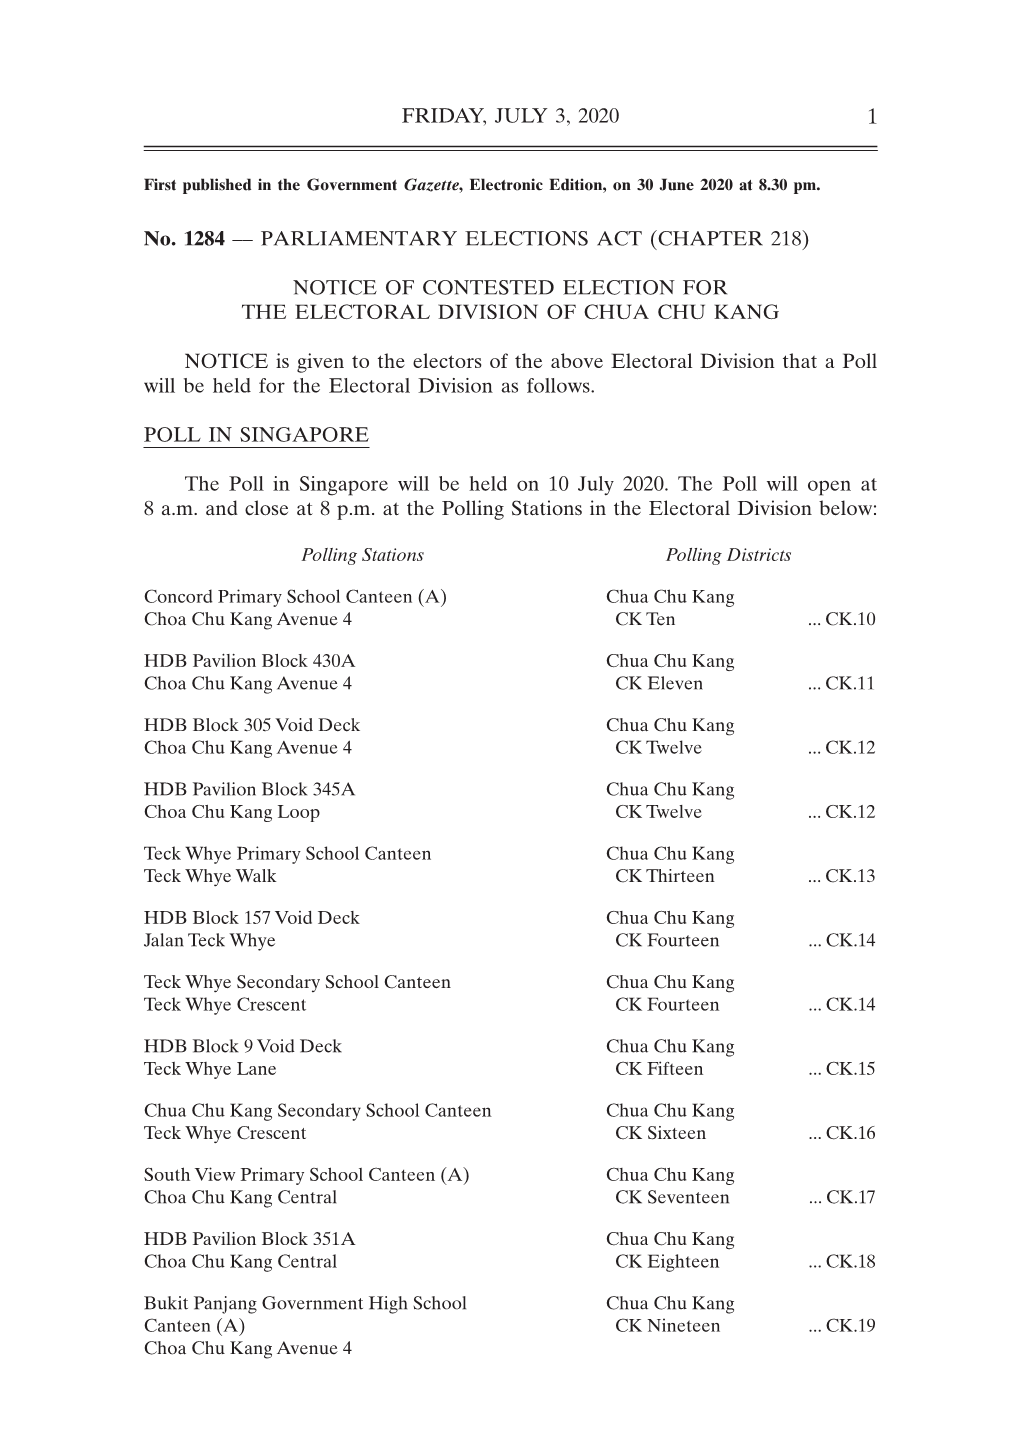 GAZETTE Notice of Contested Election for the Electoral Division of Chua Chu Kang